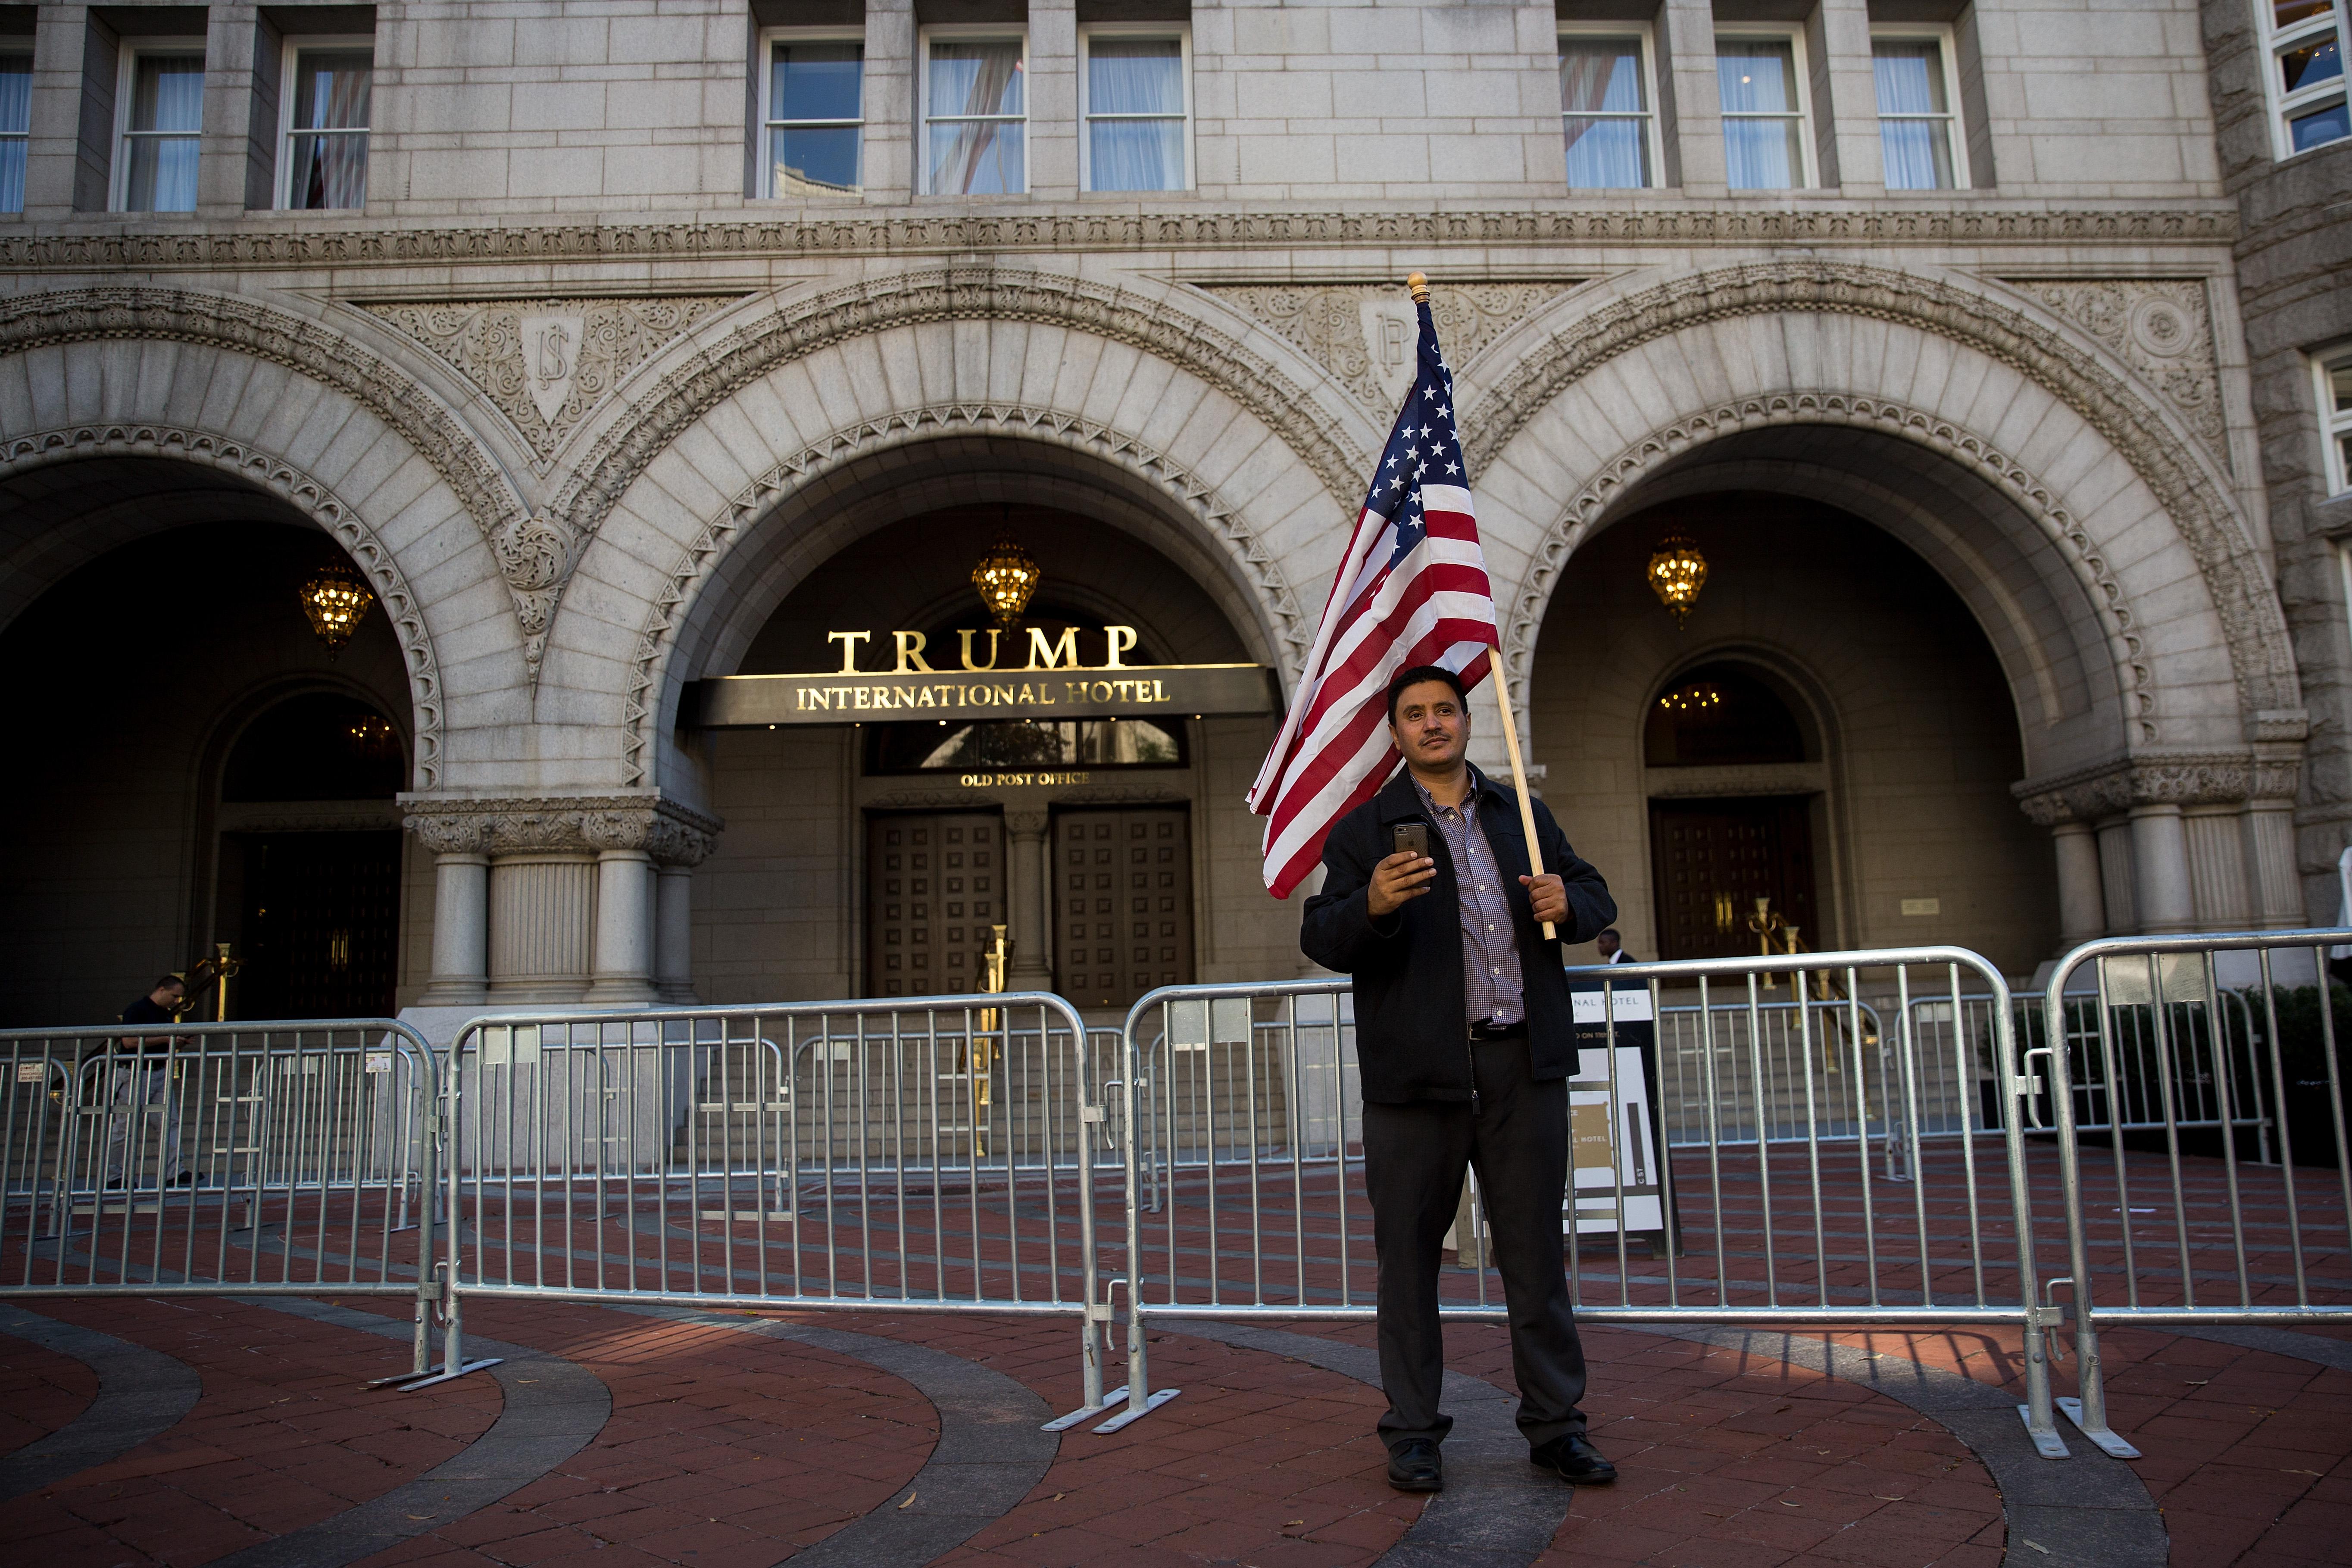 WASHINGTON, DC - OCTOBER 18: A man holds an American flag outside Trump International Hotel following a protest against the Trump administration's proposed travel ban, October 18, 2017 in Washington, DC. Early Wednesday morning, a federal judge in Maryland granted a motion for a preliminary injunction on the administration's travel ban. This is the Trump administration's third attempt to restrict entry into the United States for citizens from mostly Muslim-majority countries. The Department of Justice said it plans to appeal and the White House issued a statement calling the judge's decision 'dangerously flawed.' (Photo by Drew Angerer/Getty Images)